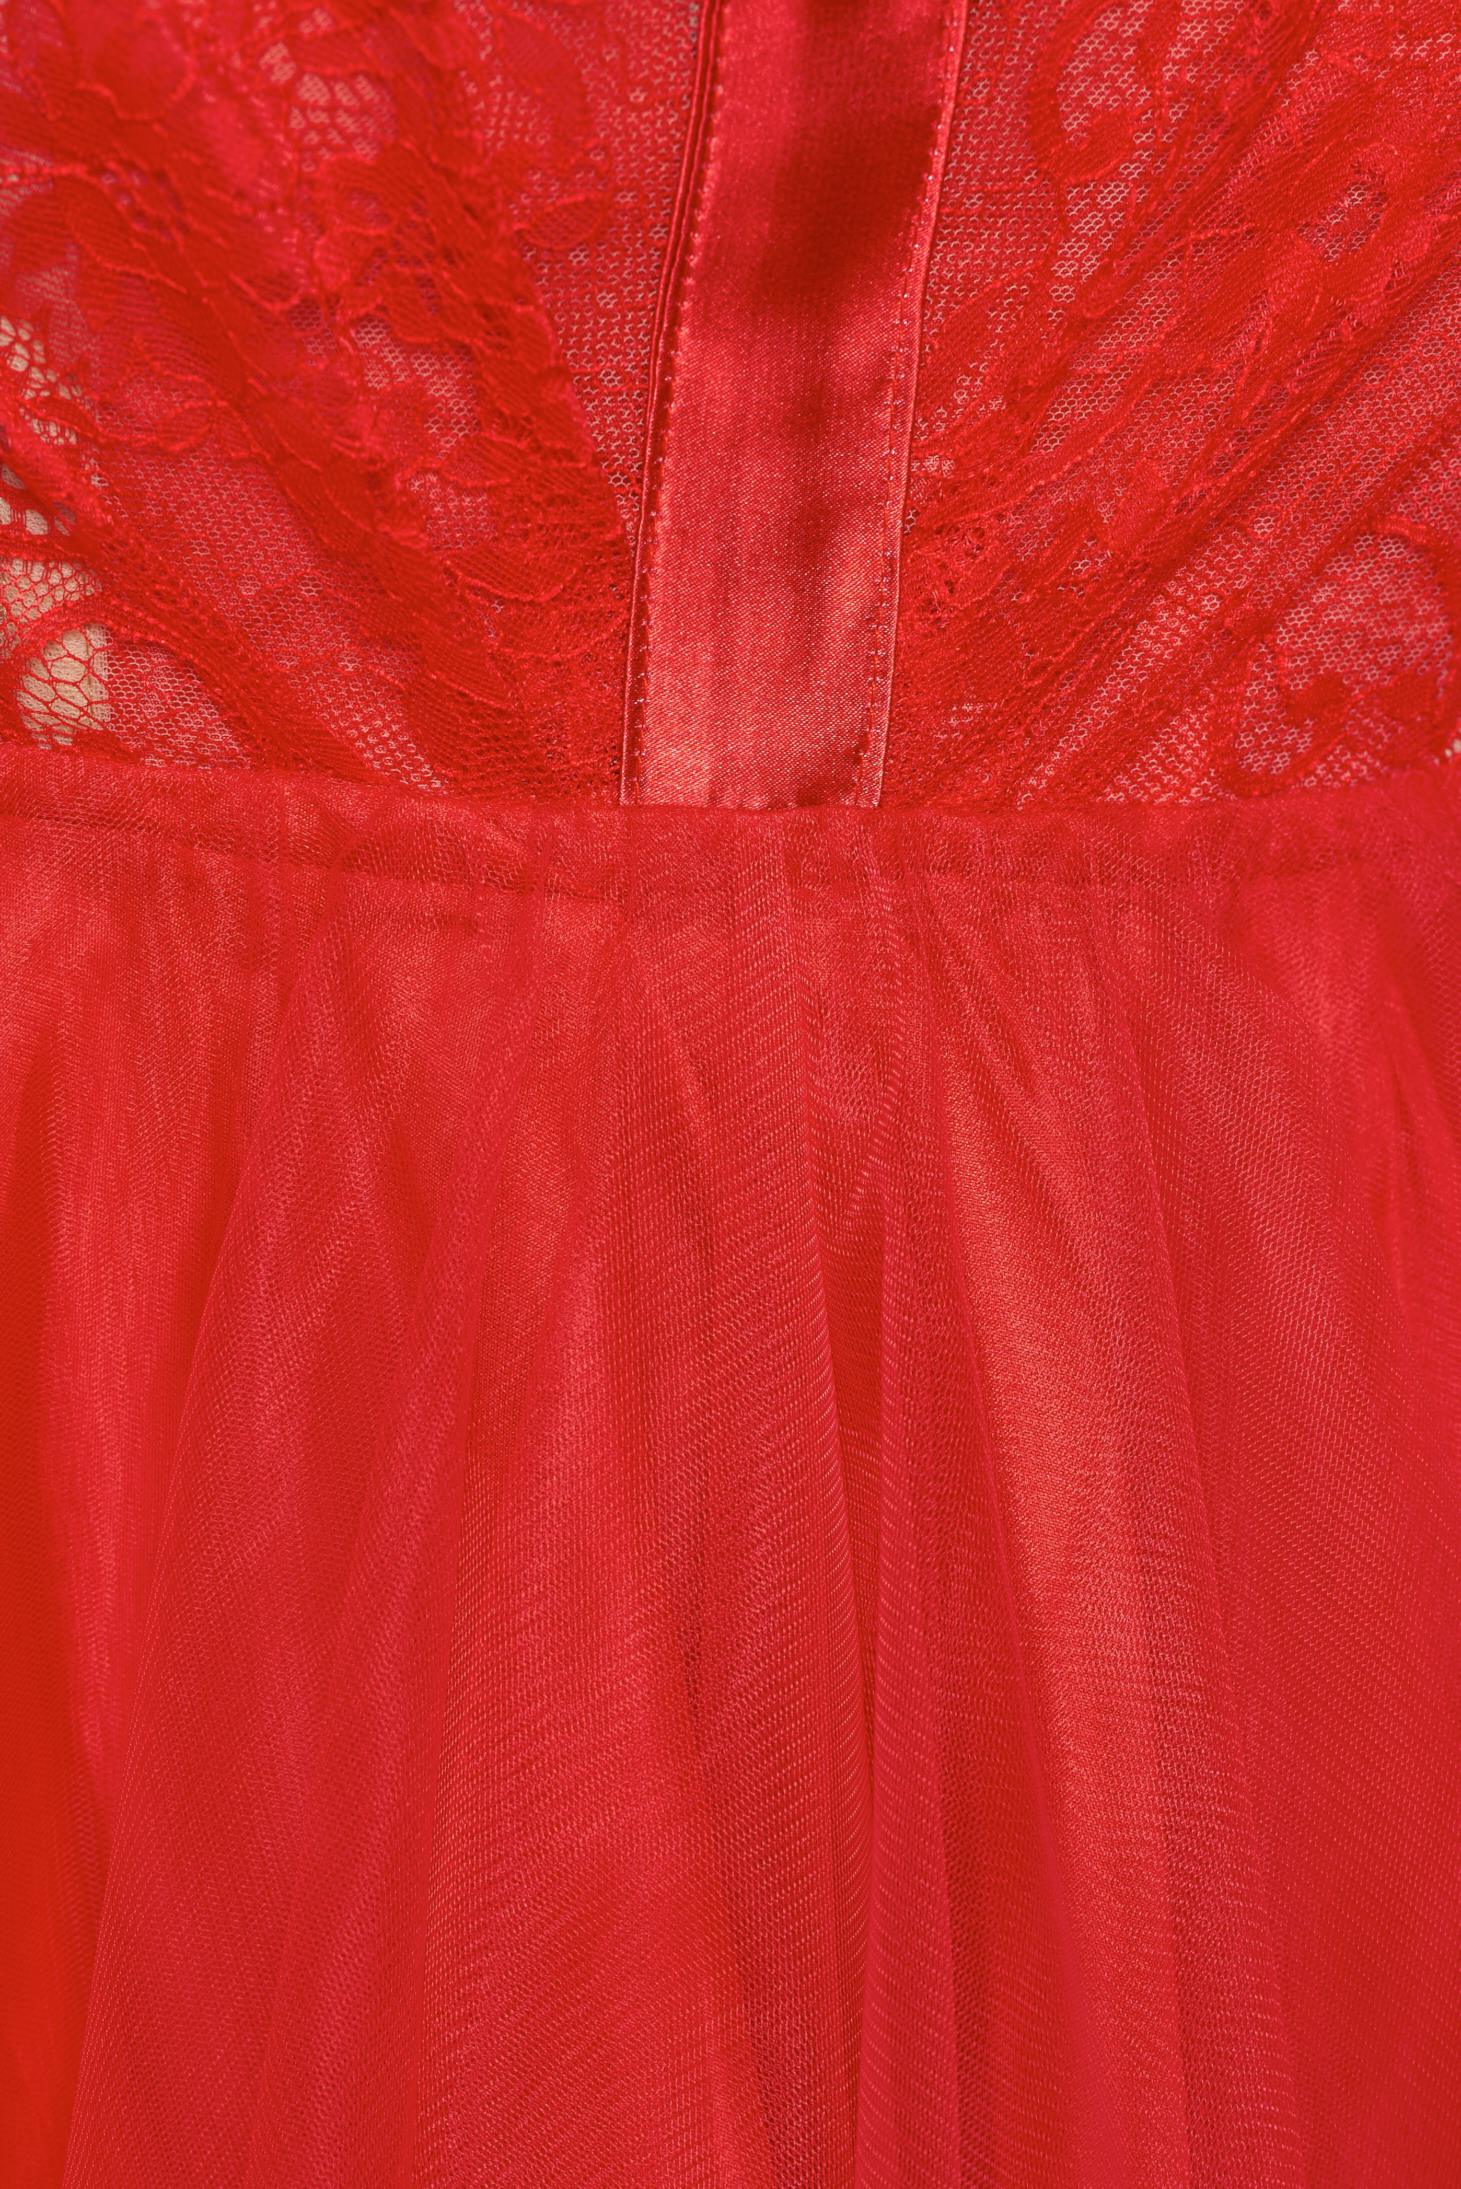 Occasional Ana Radu red cloche dress with lace details